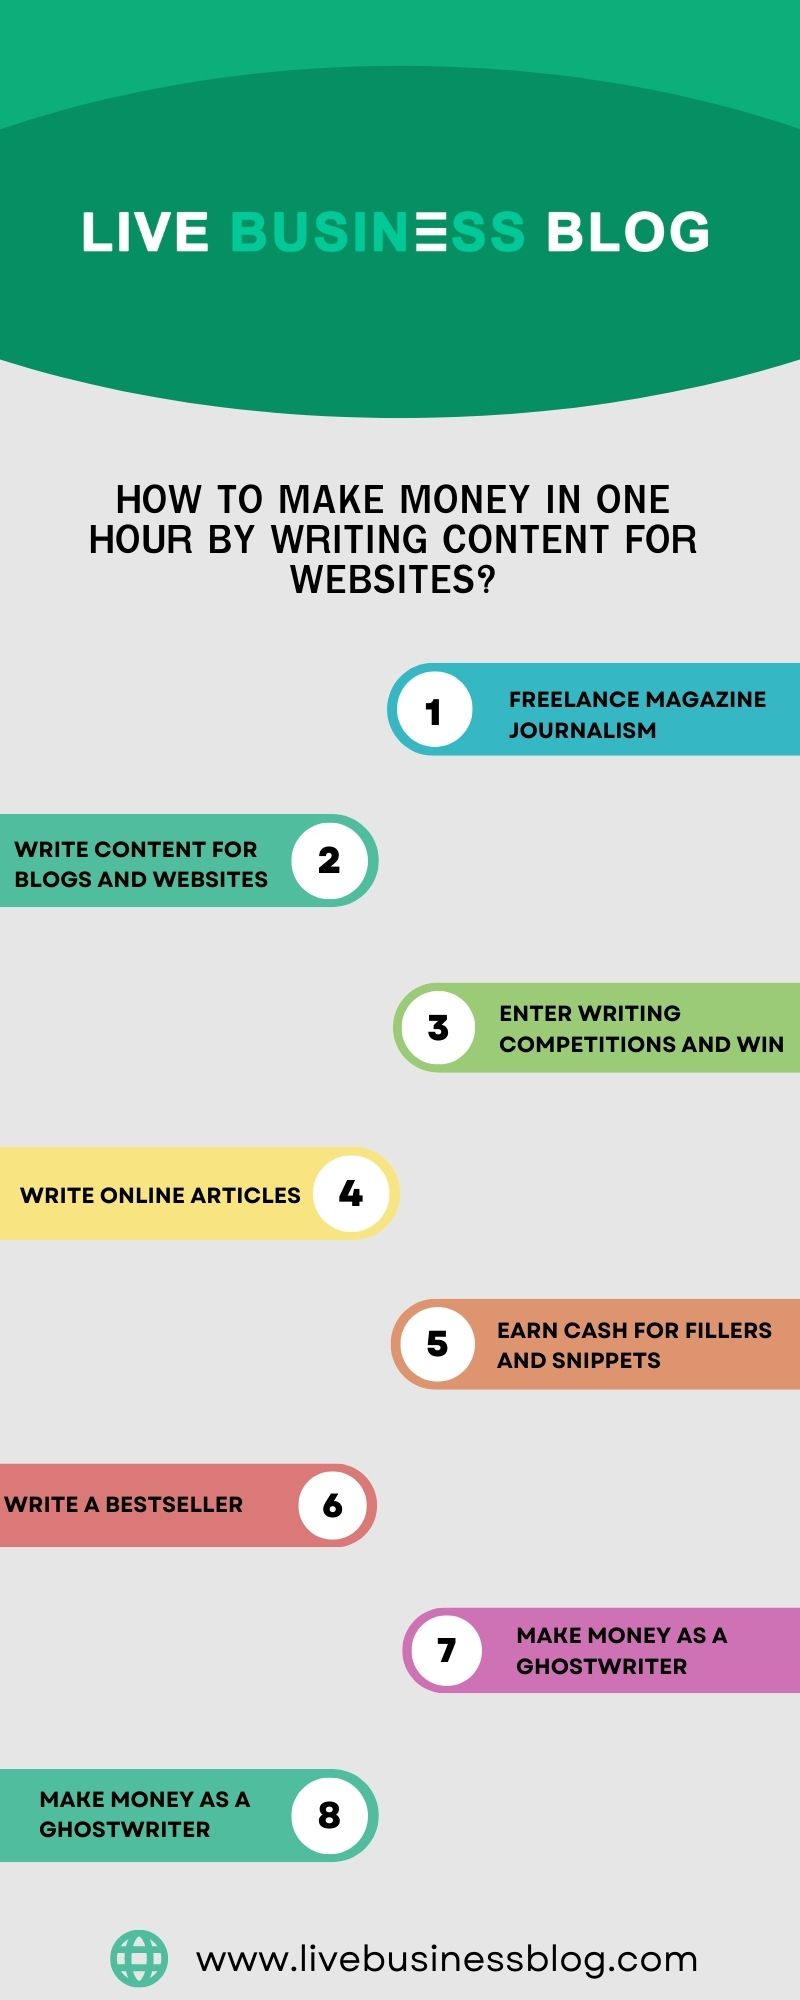 How to Make Money in One Hour by Writing Content for Websites